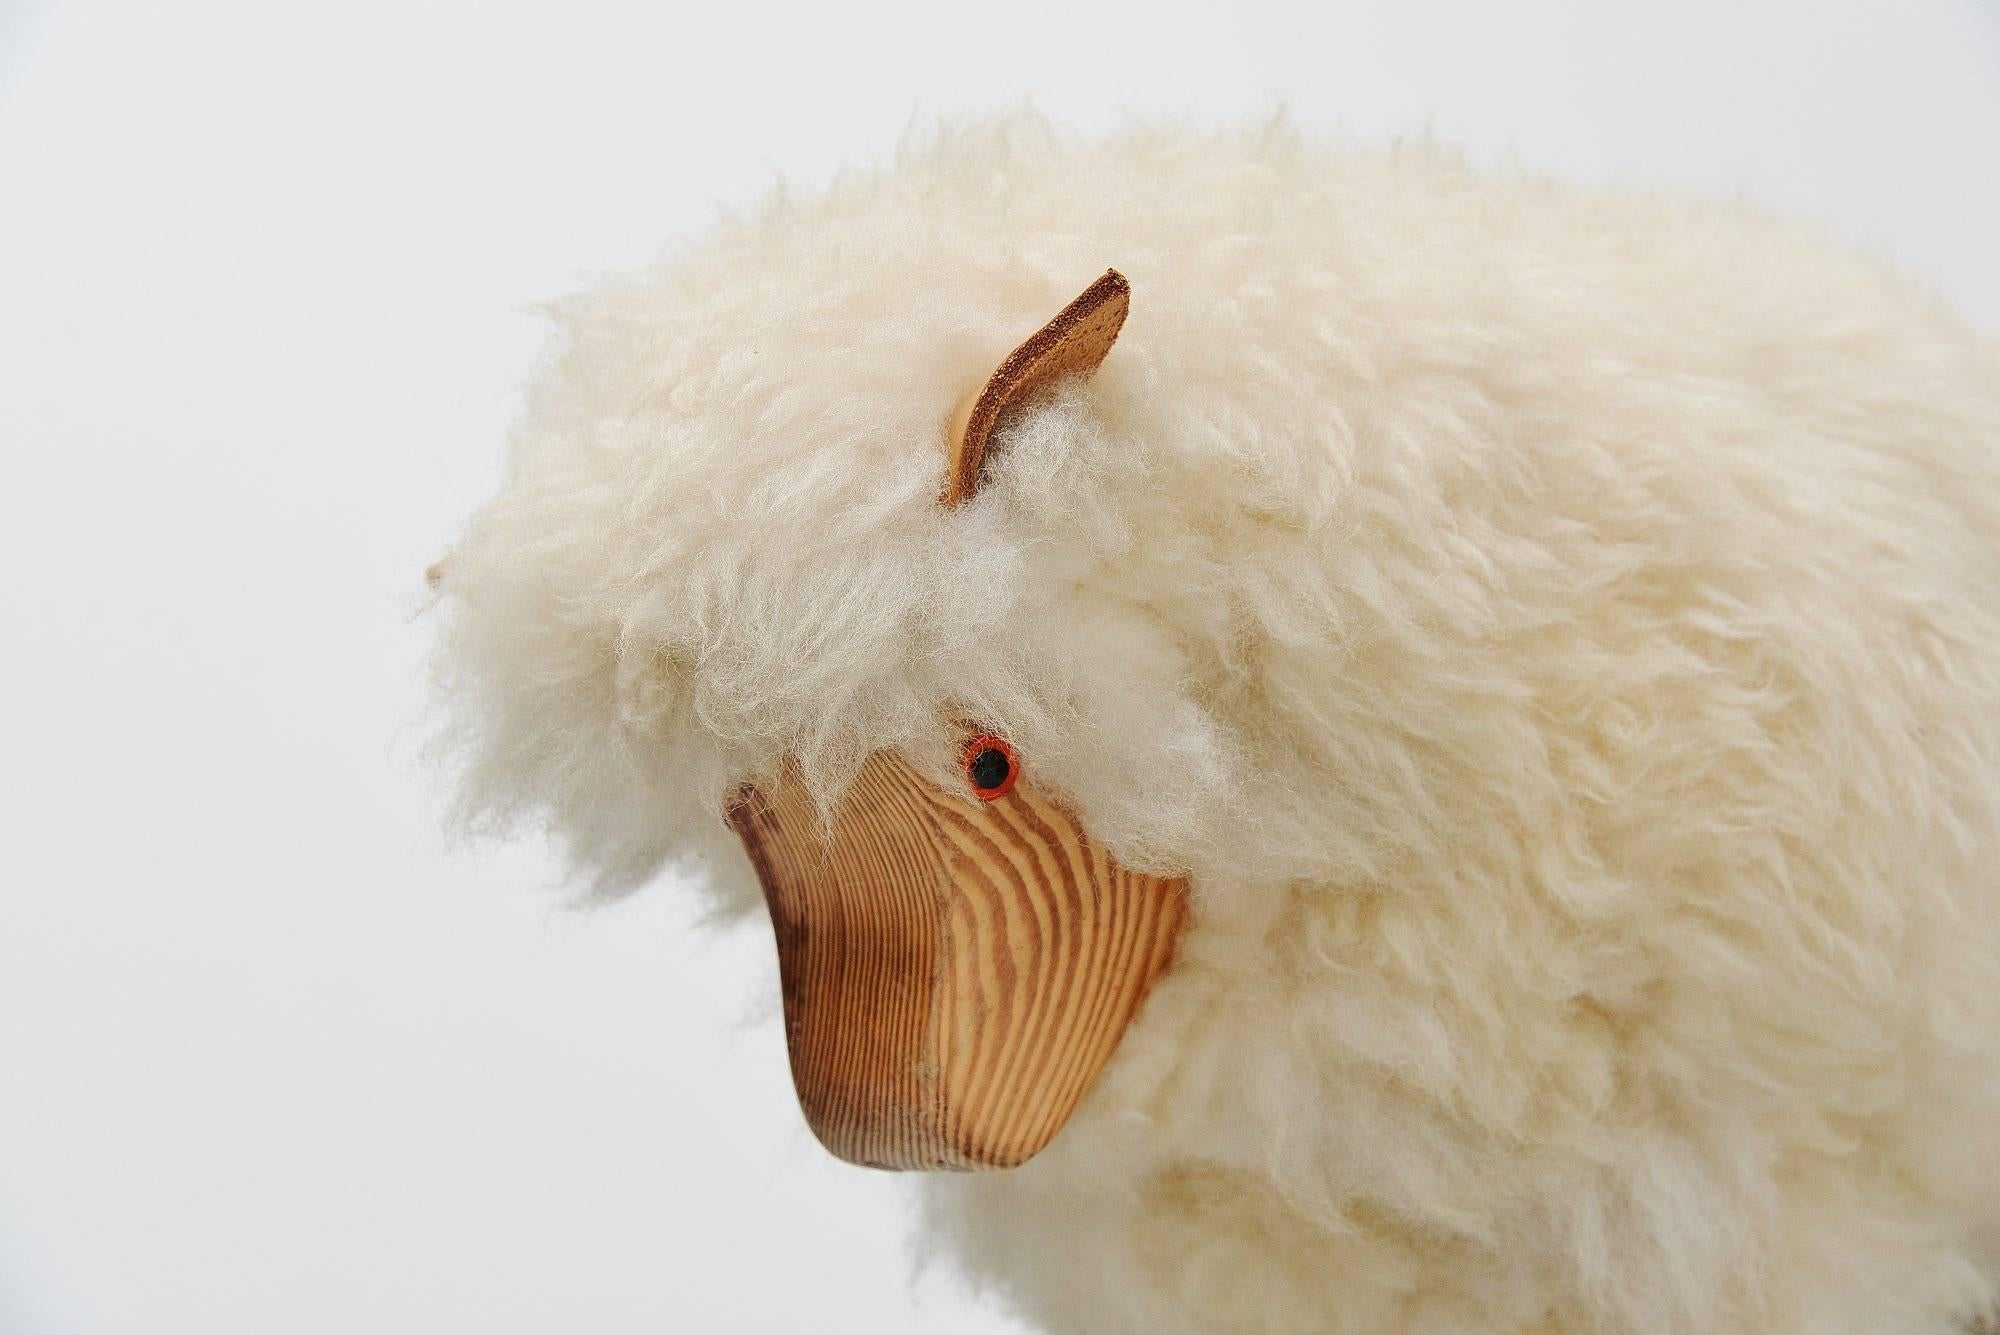 Very nice decorative sheep made by unknown manufacturer, Germany 1970. This sheep was made of solid pine wood and is covered with real sheep wool, its ears are made of leather. These sheep were designed as shop window decoration for blankets made of